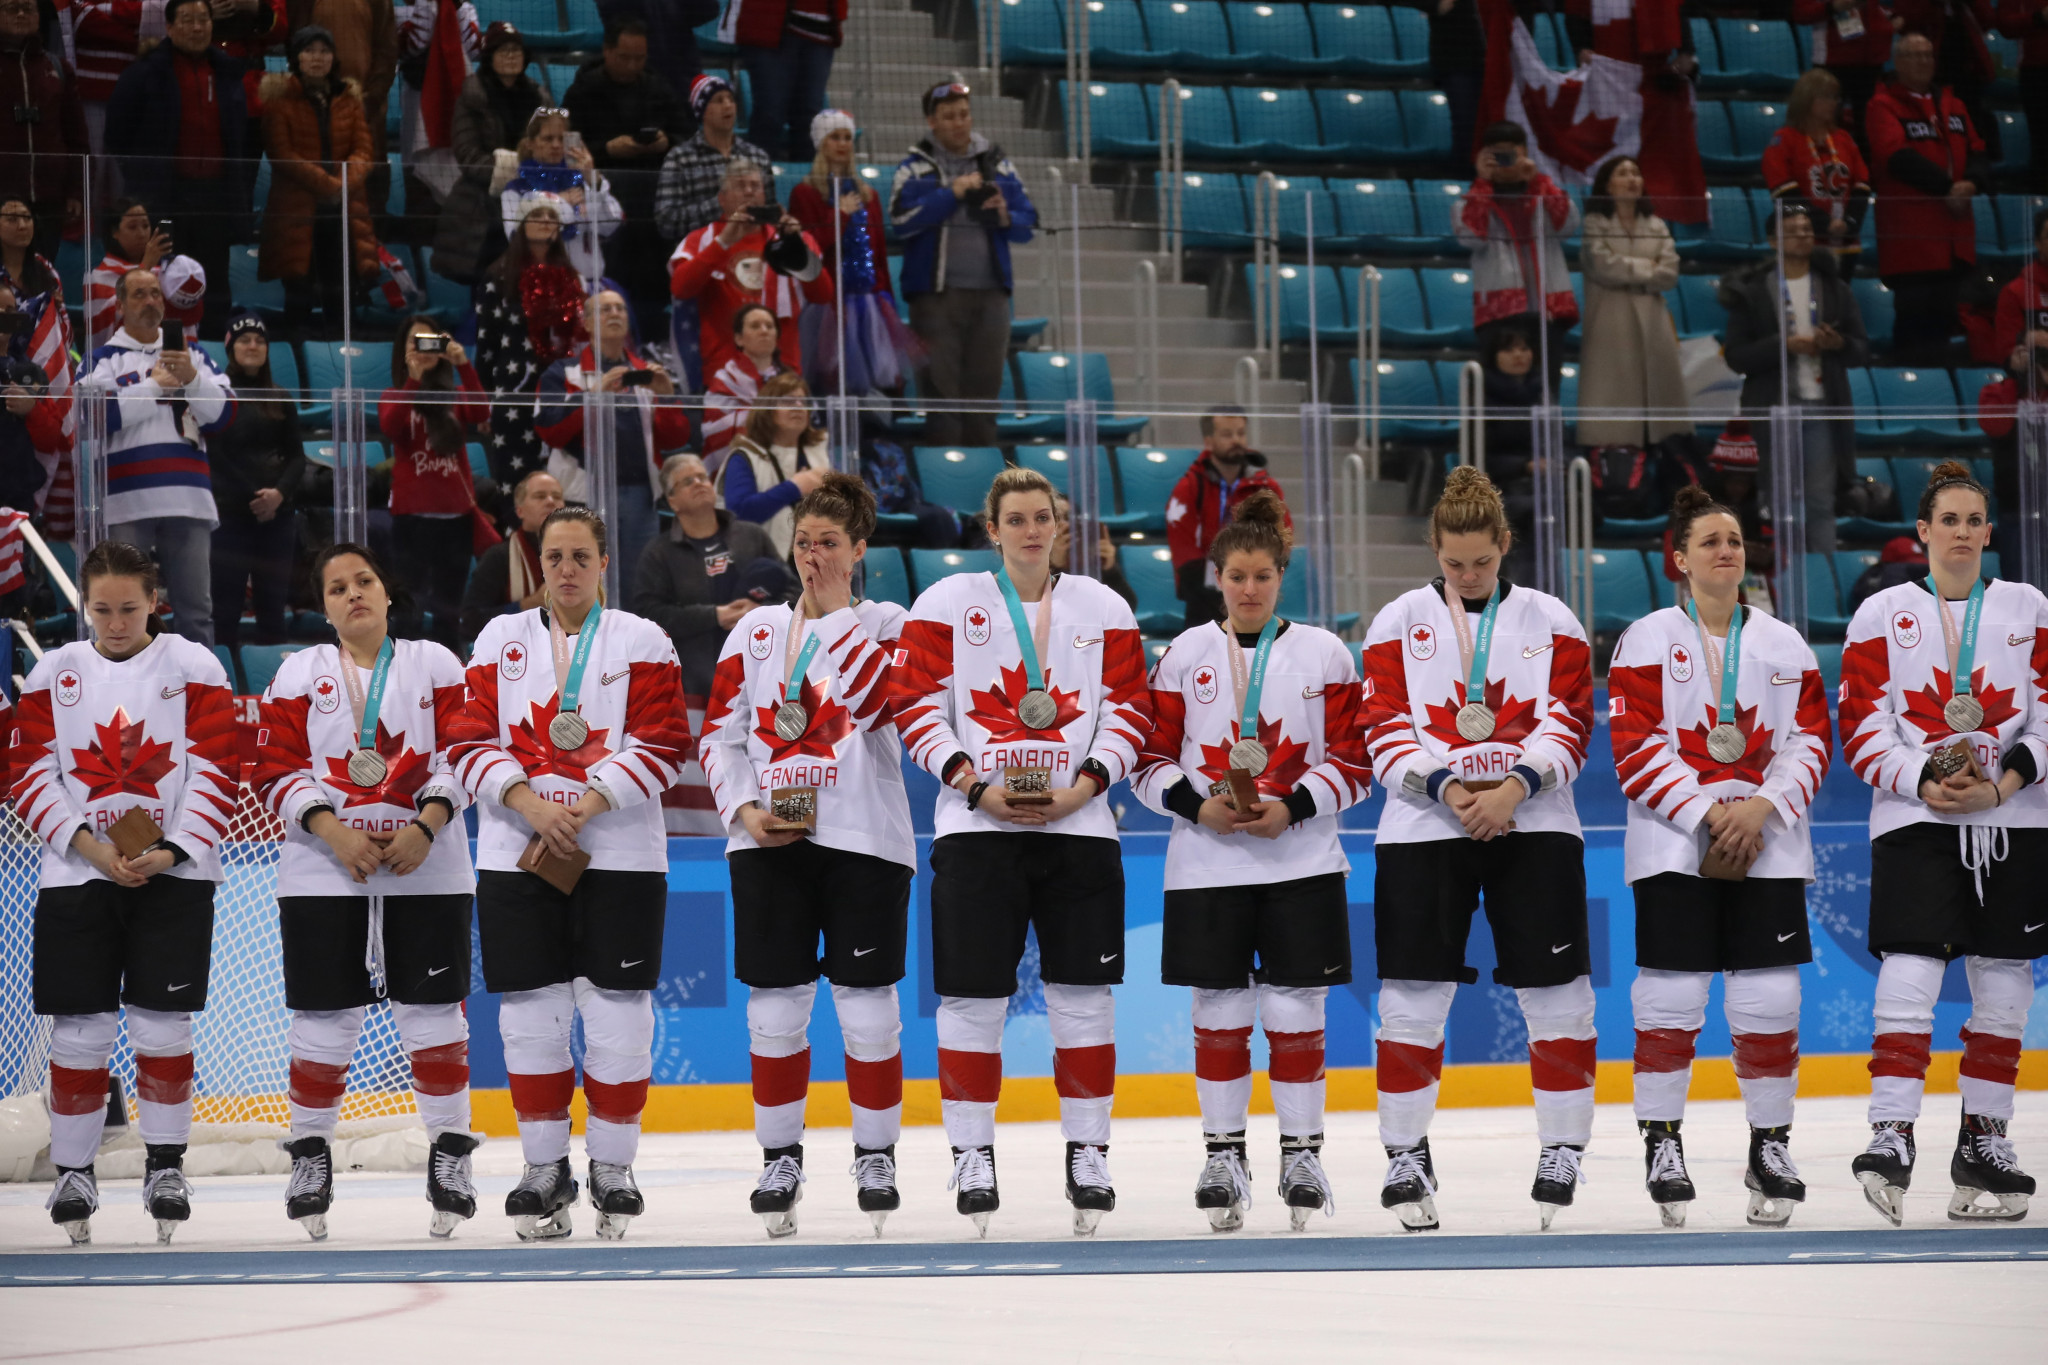 Canada will aim to avenge the defeat they suffered to the United States in the Olympic final at Pyeongchang 2018 ©Getty Images